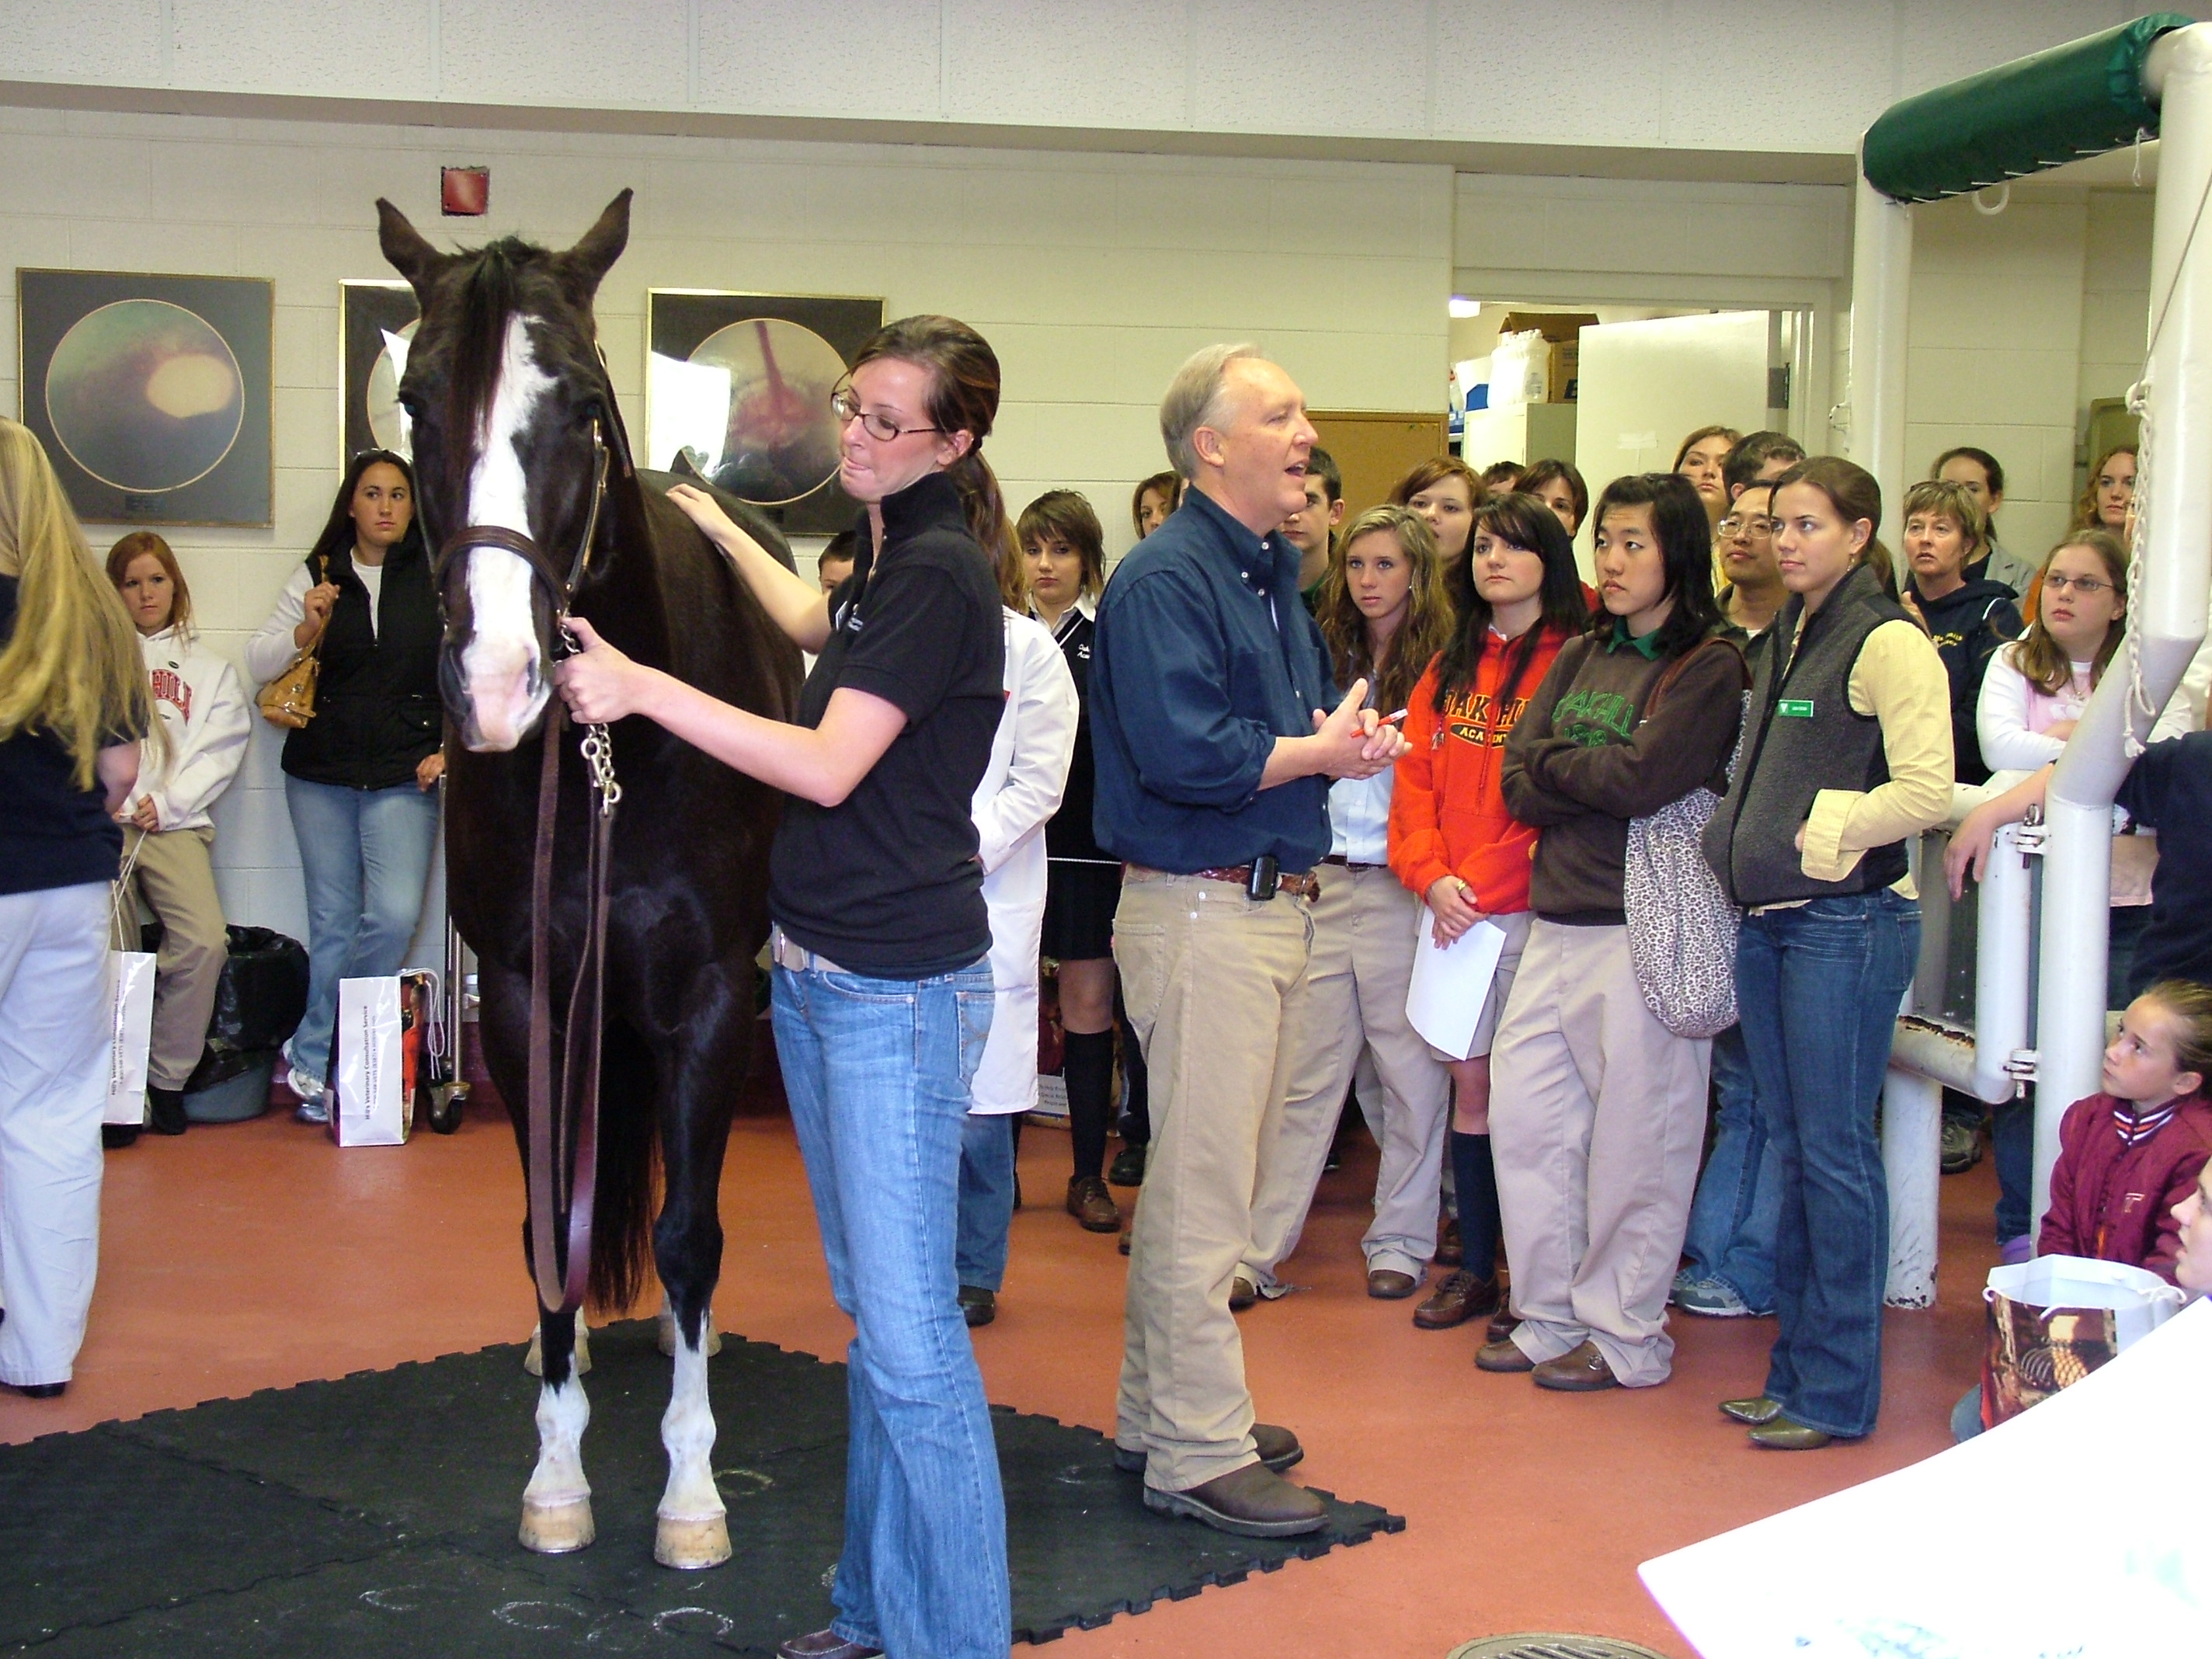 Dr. Mark Crisman, a professor in the Department of Large Animal Clinical Sciences, explains the benefits acupuncture can offer equine patients to a group a visitor's during the college's Annual Open House.